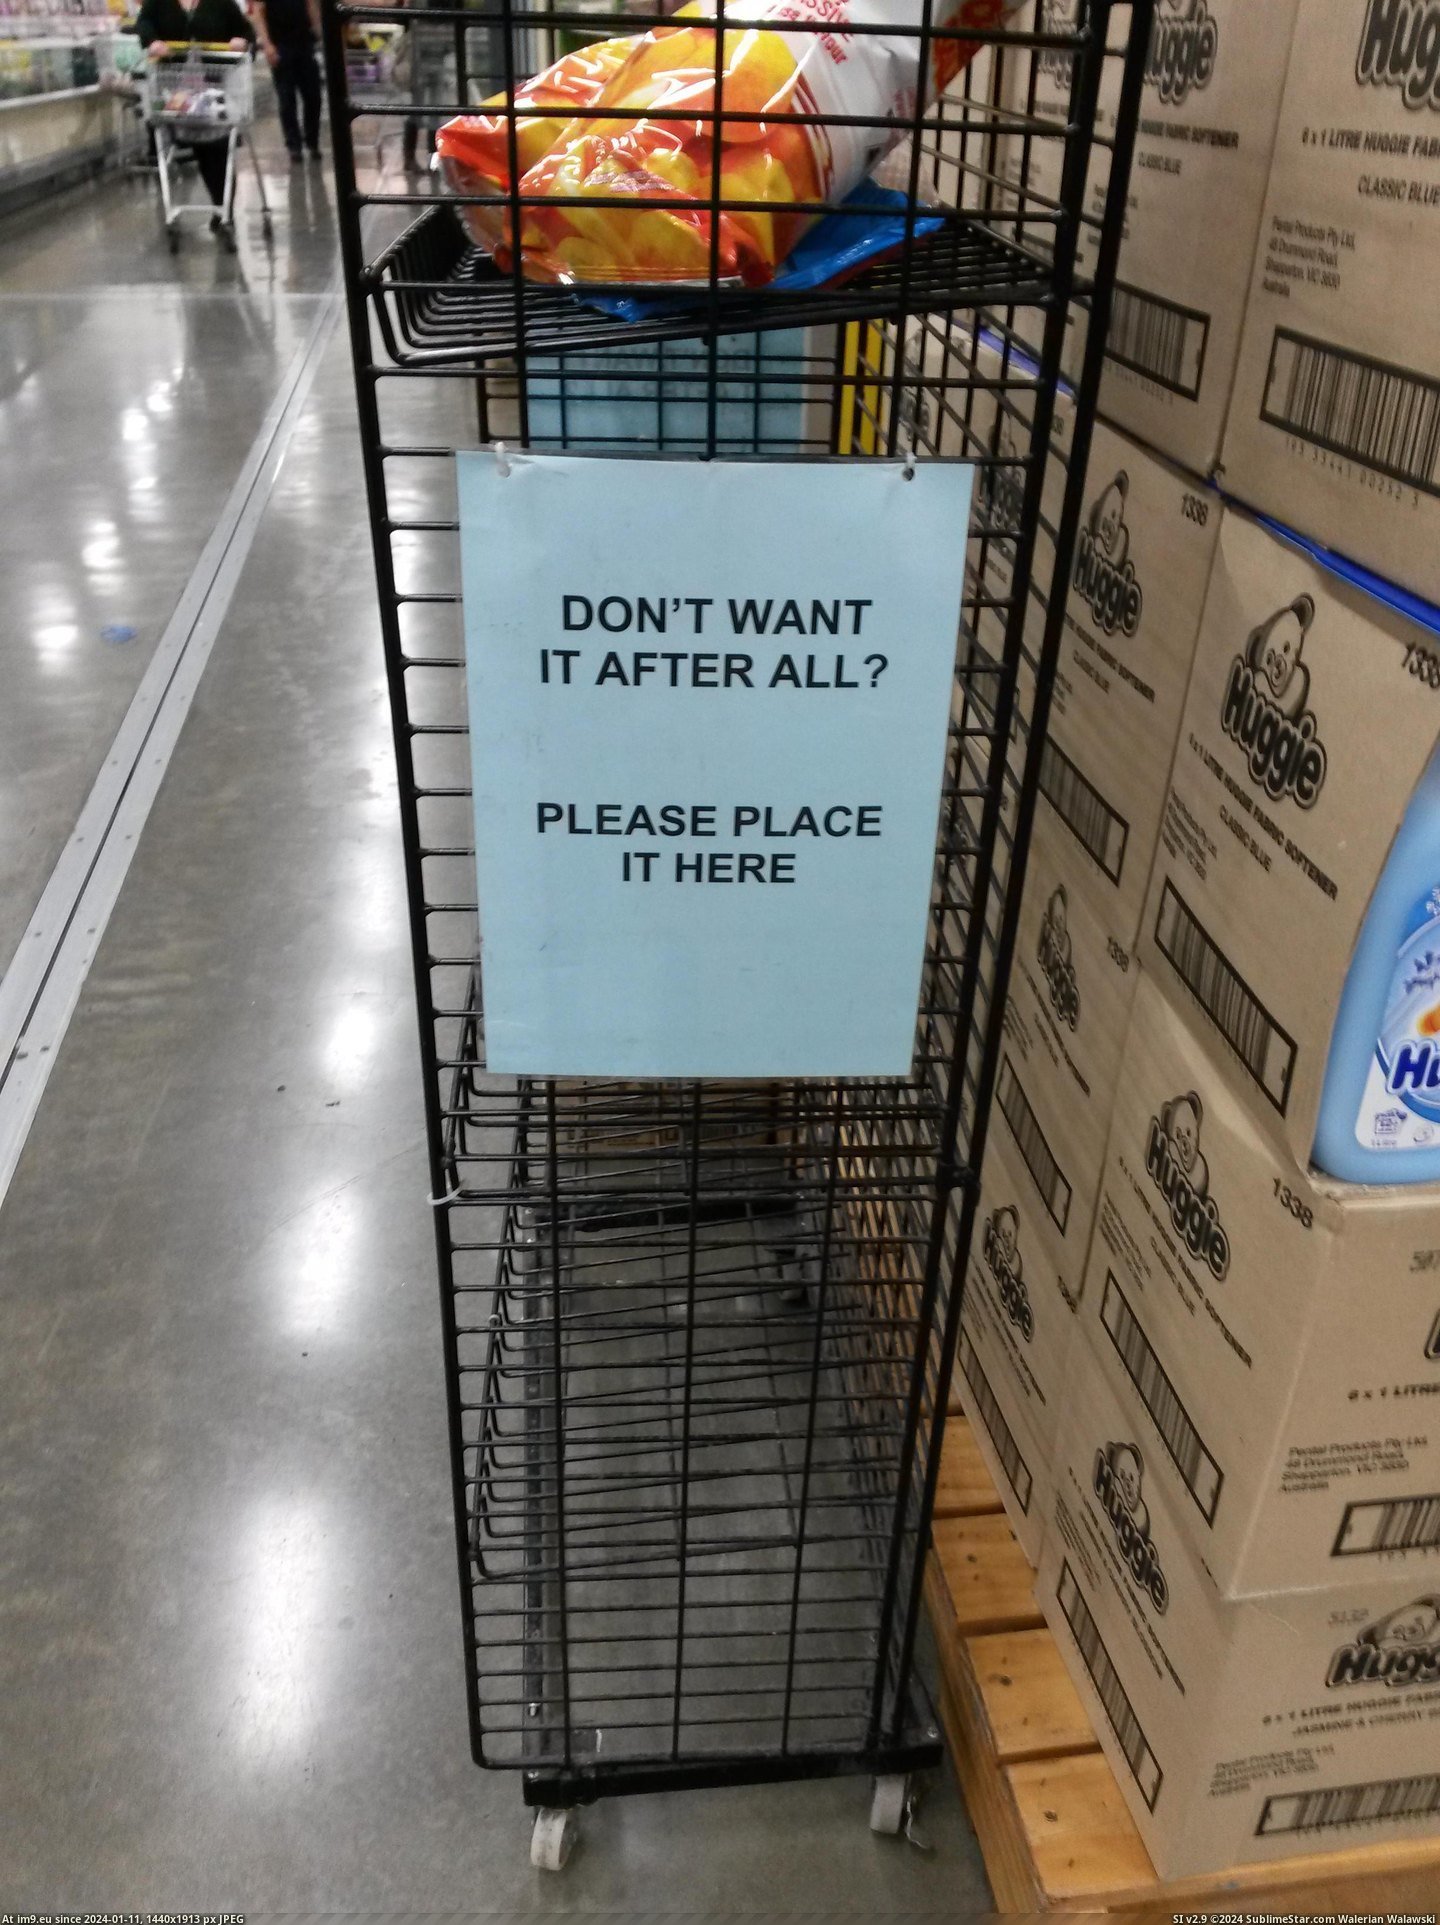 [Mildlyinteresting] This supermarket has a place to put stuff if you change your mind. (in My r/MILDLYINTERESTING favs)